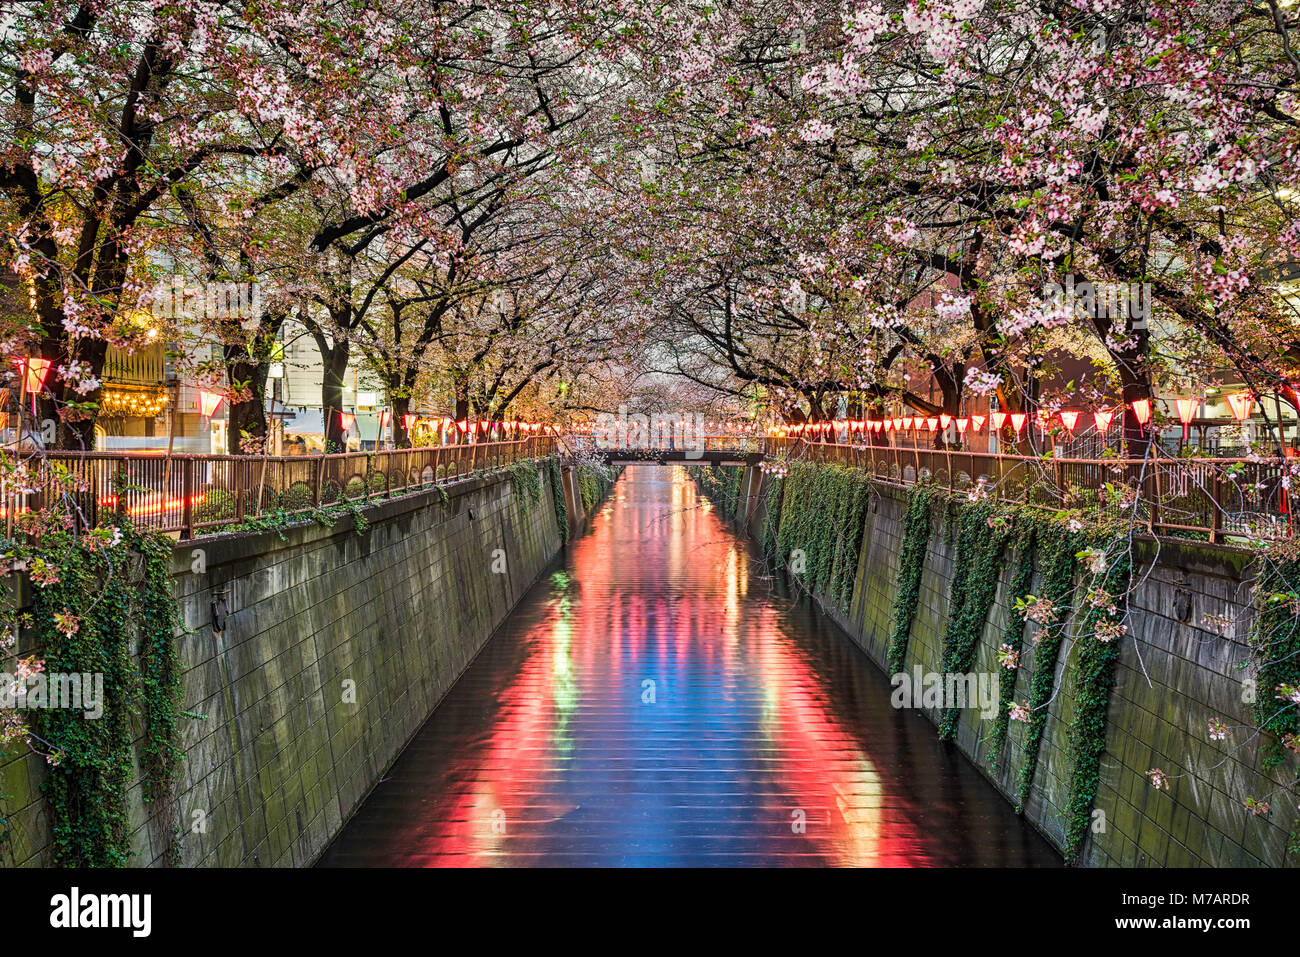 Cherry blossom trees at night in Tokyo, Japan Stock Photo